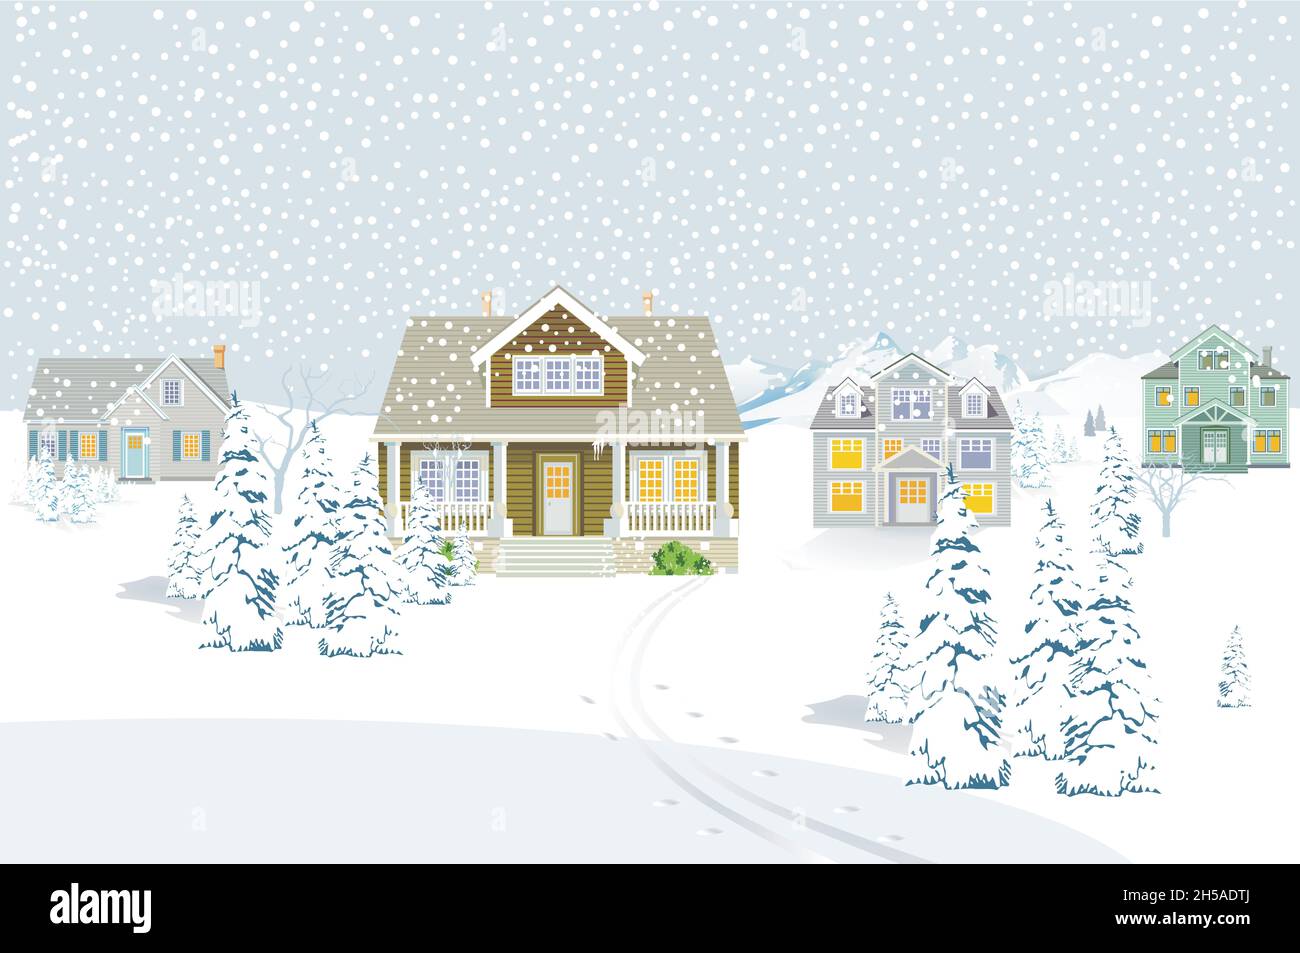 Country houses at Christmas in the snowy landscape, Illustration, Stock Vector